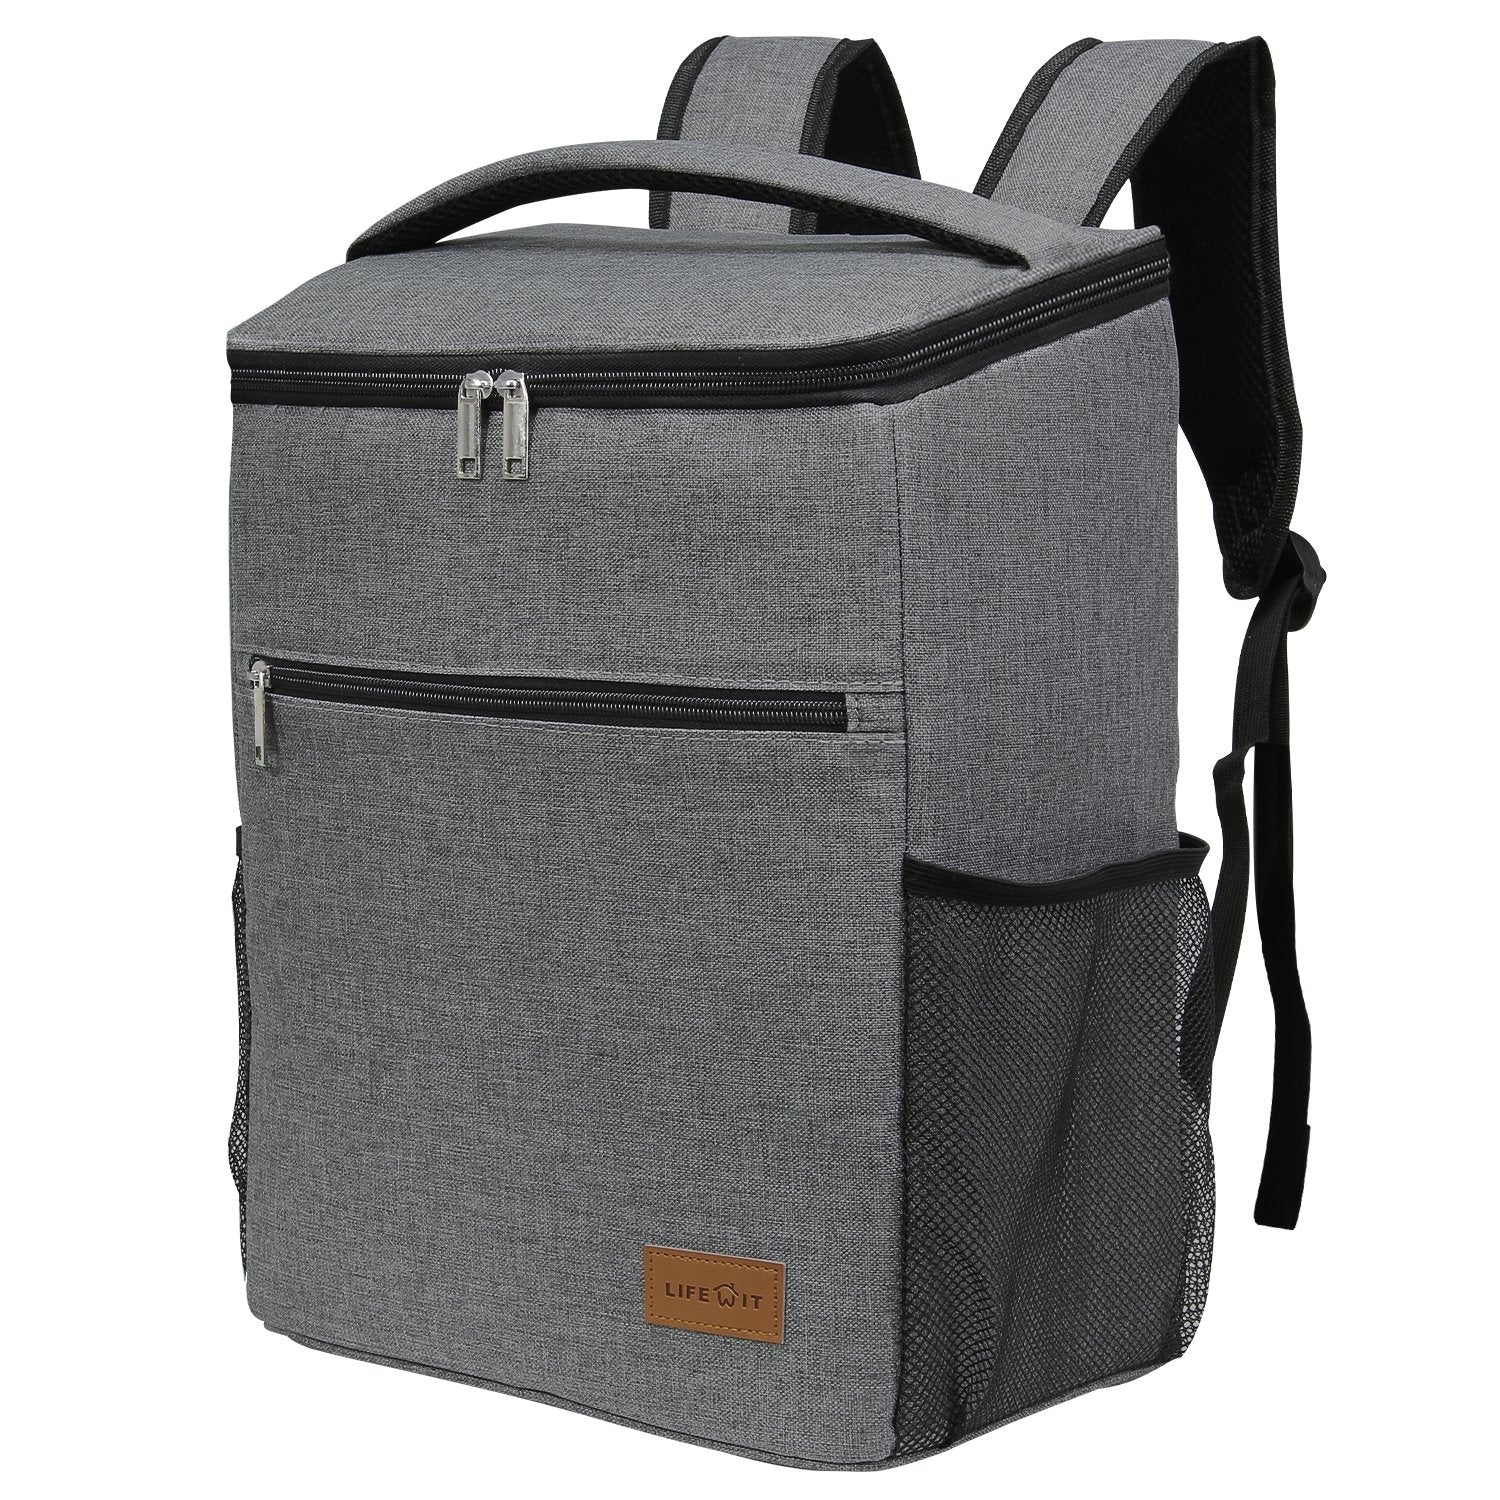 Lifewit Cooling Lunch Bag - Review 